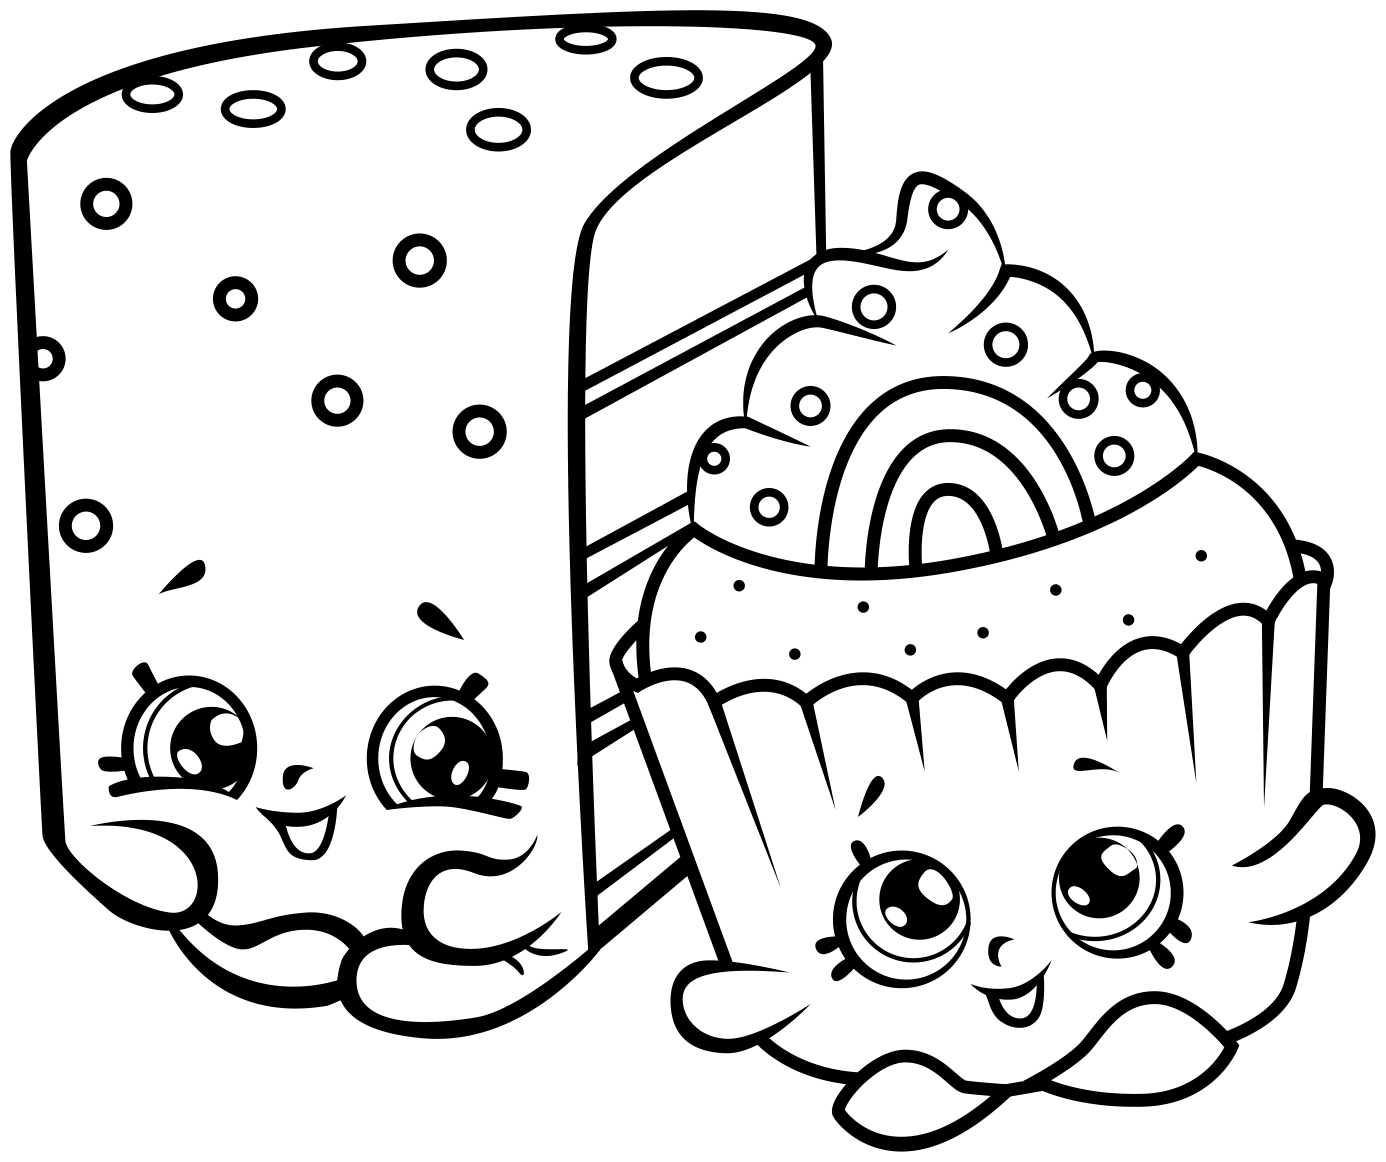 Shopkins Coloring Pages - Best Coloring Pages For Kids - Free Printable Coloring Pages